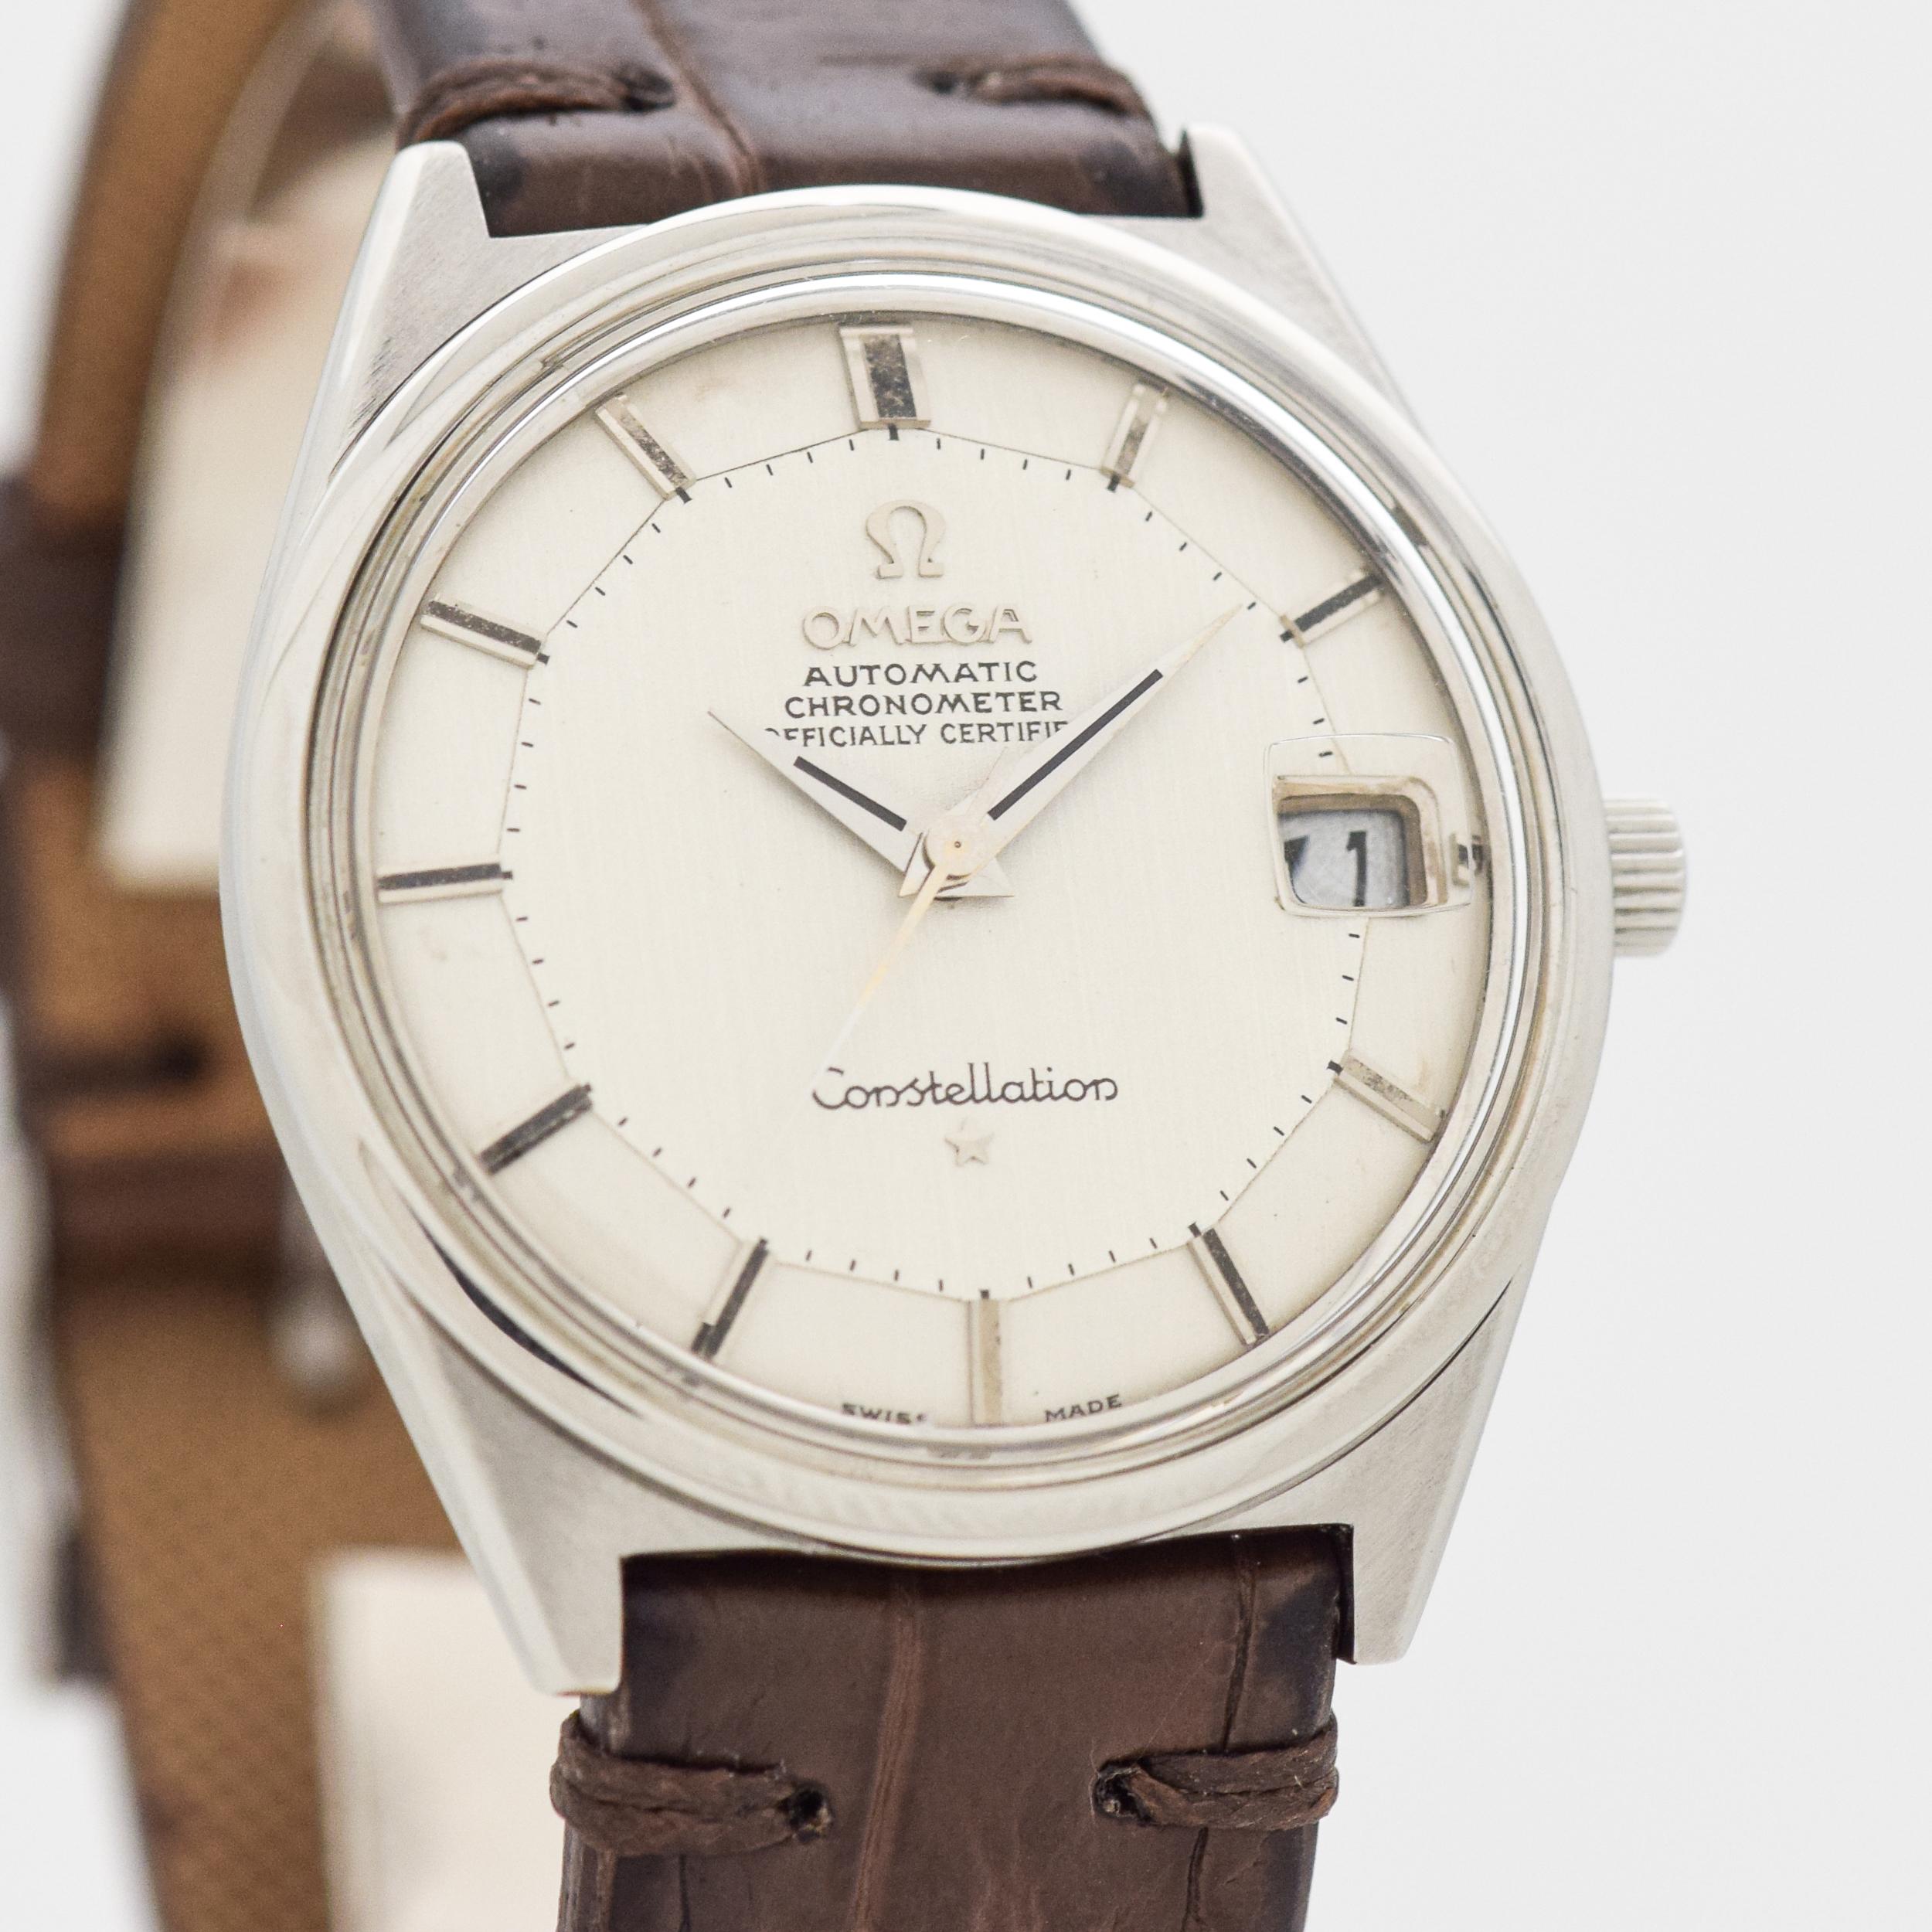 1969 Vintage Omega Constellation Chronometer Ref. 168.025 Stainless Steel watch with Original Silver Pie Pan Dial with Applied Beveled Steel Stick/Bar/Baton Markers. 33mm x 38mm lug to lug (1.3 in. x 1.5 in.) - 24 jewel, automatic caliber movement.